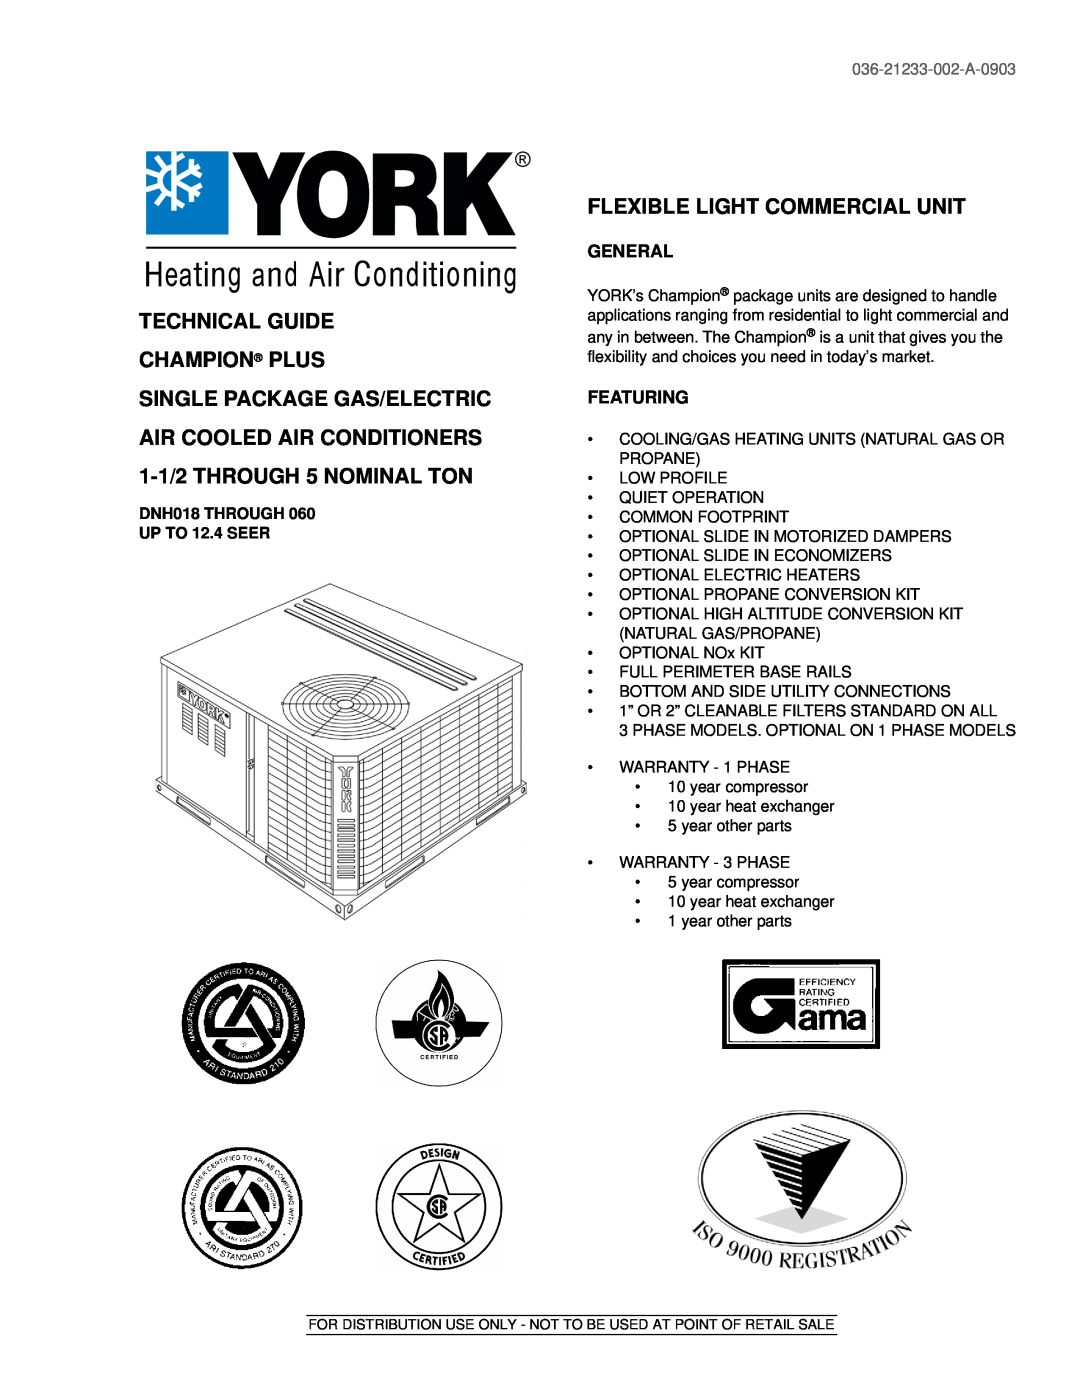 York DNH018 warranty Technical Guide Champion Plus, Flexible Light Commercial Unit, General, Featuring 